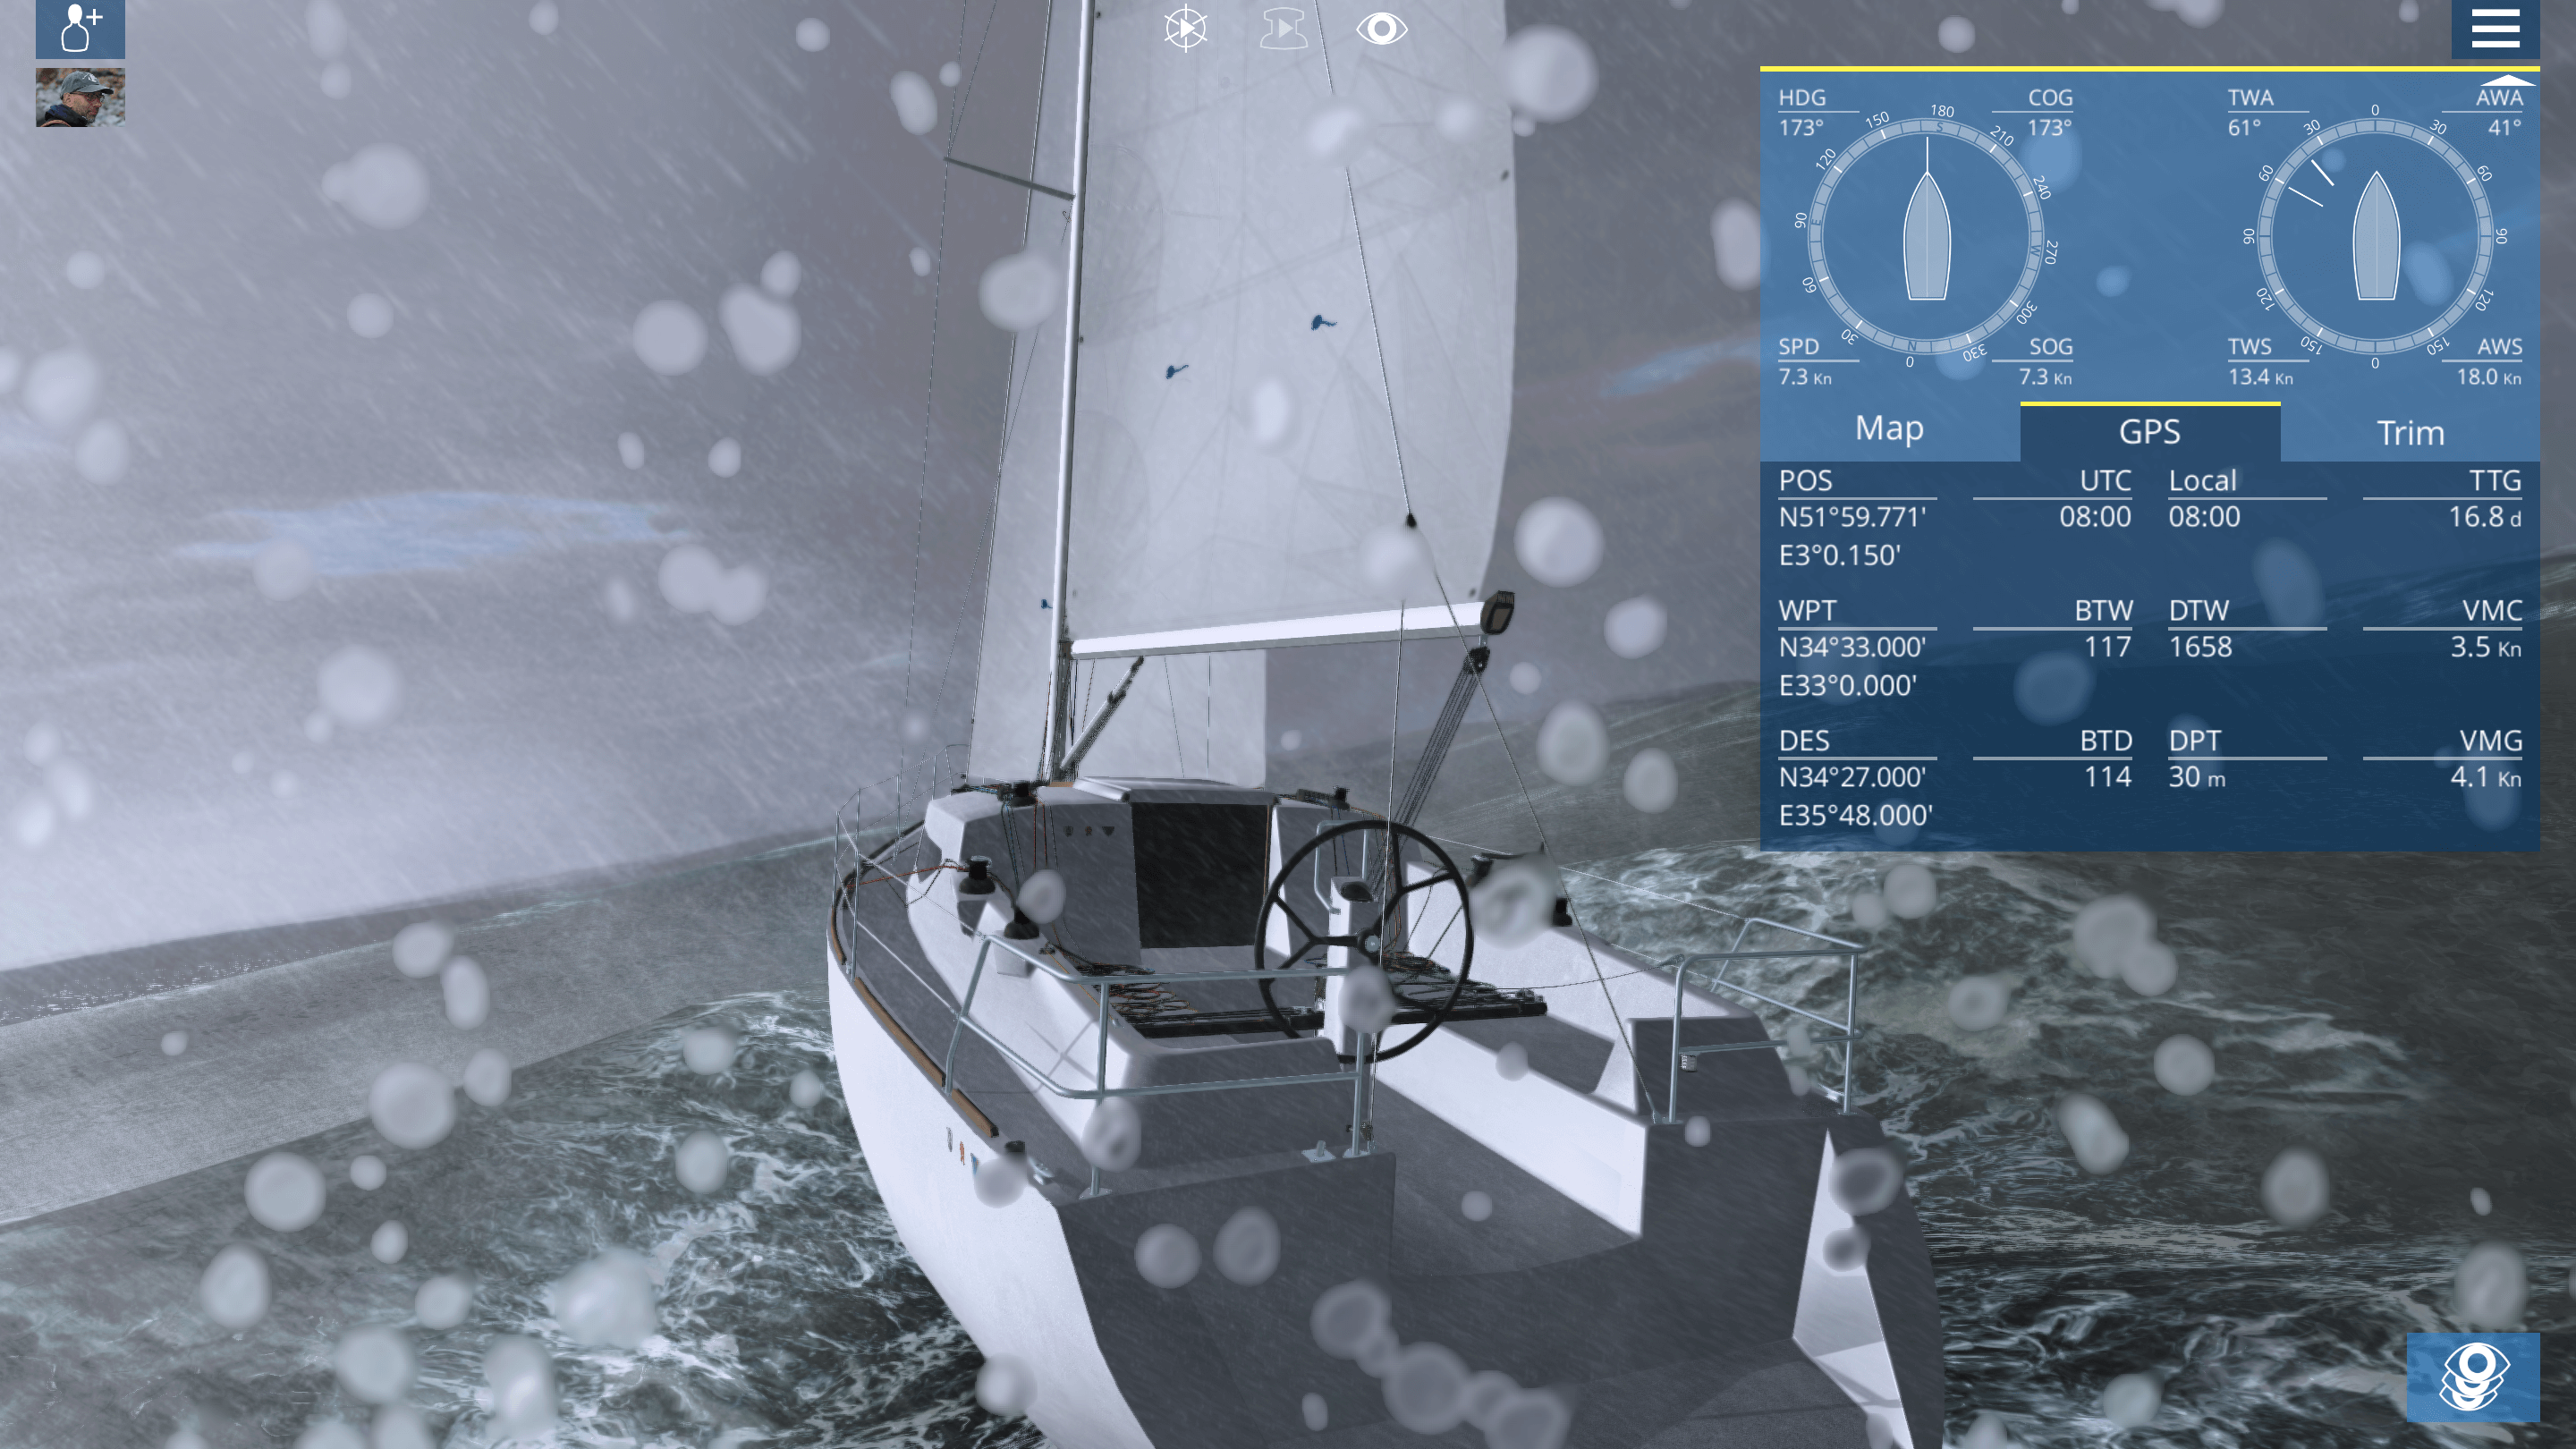 Experience the Art of Sailing and Explore the worlds Oceans in the Ultimate Sailing Simulator Sailaway 👾 COSMOCOVER